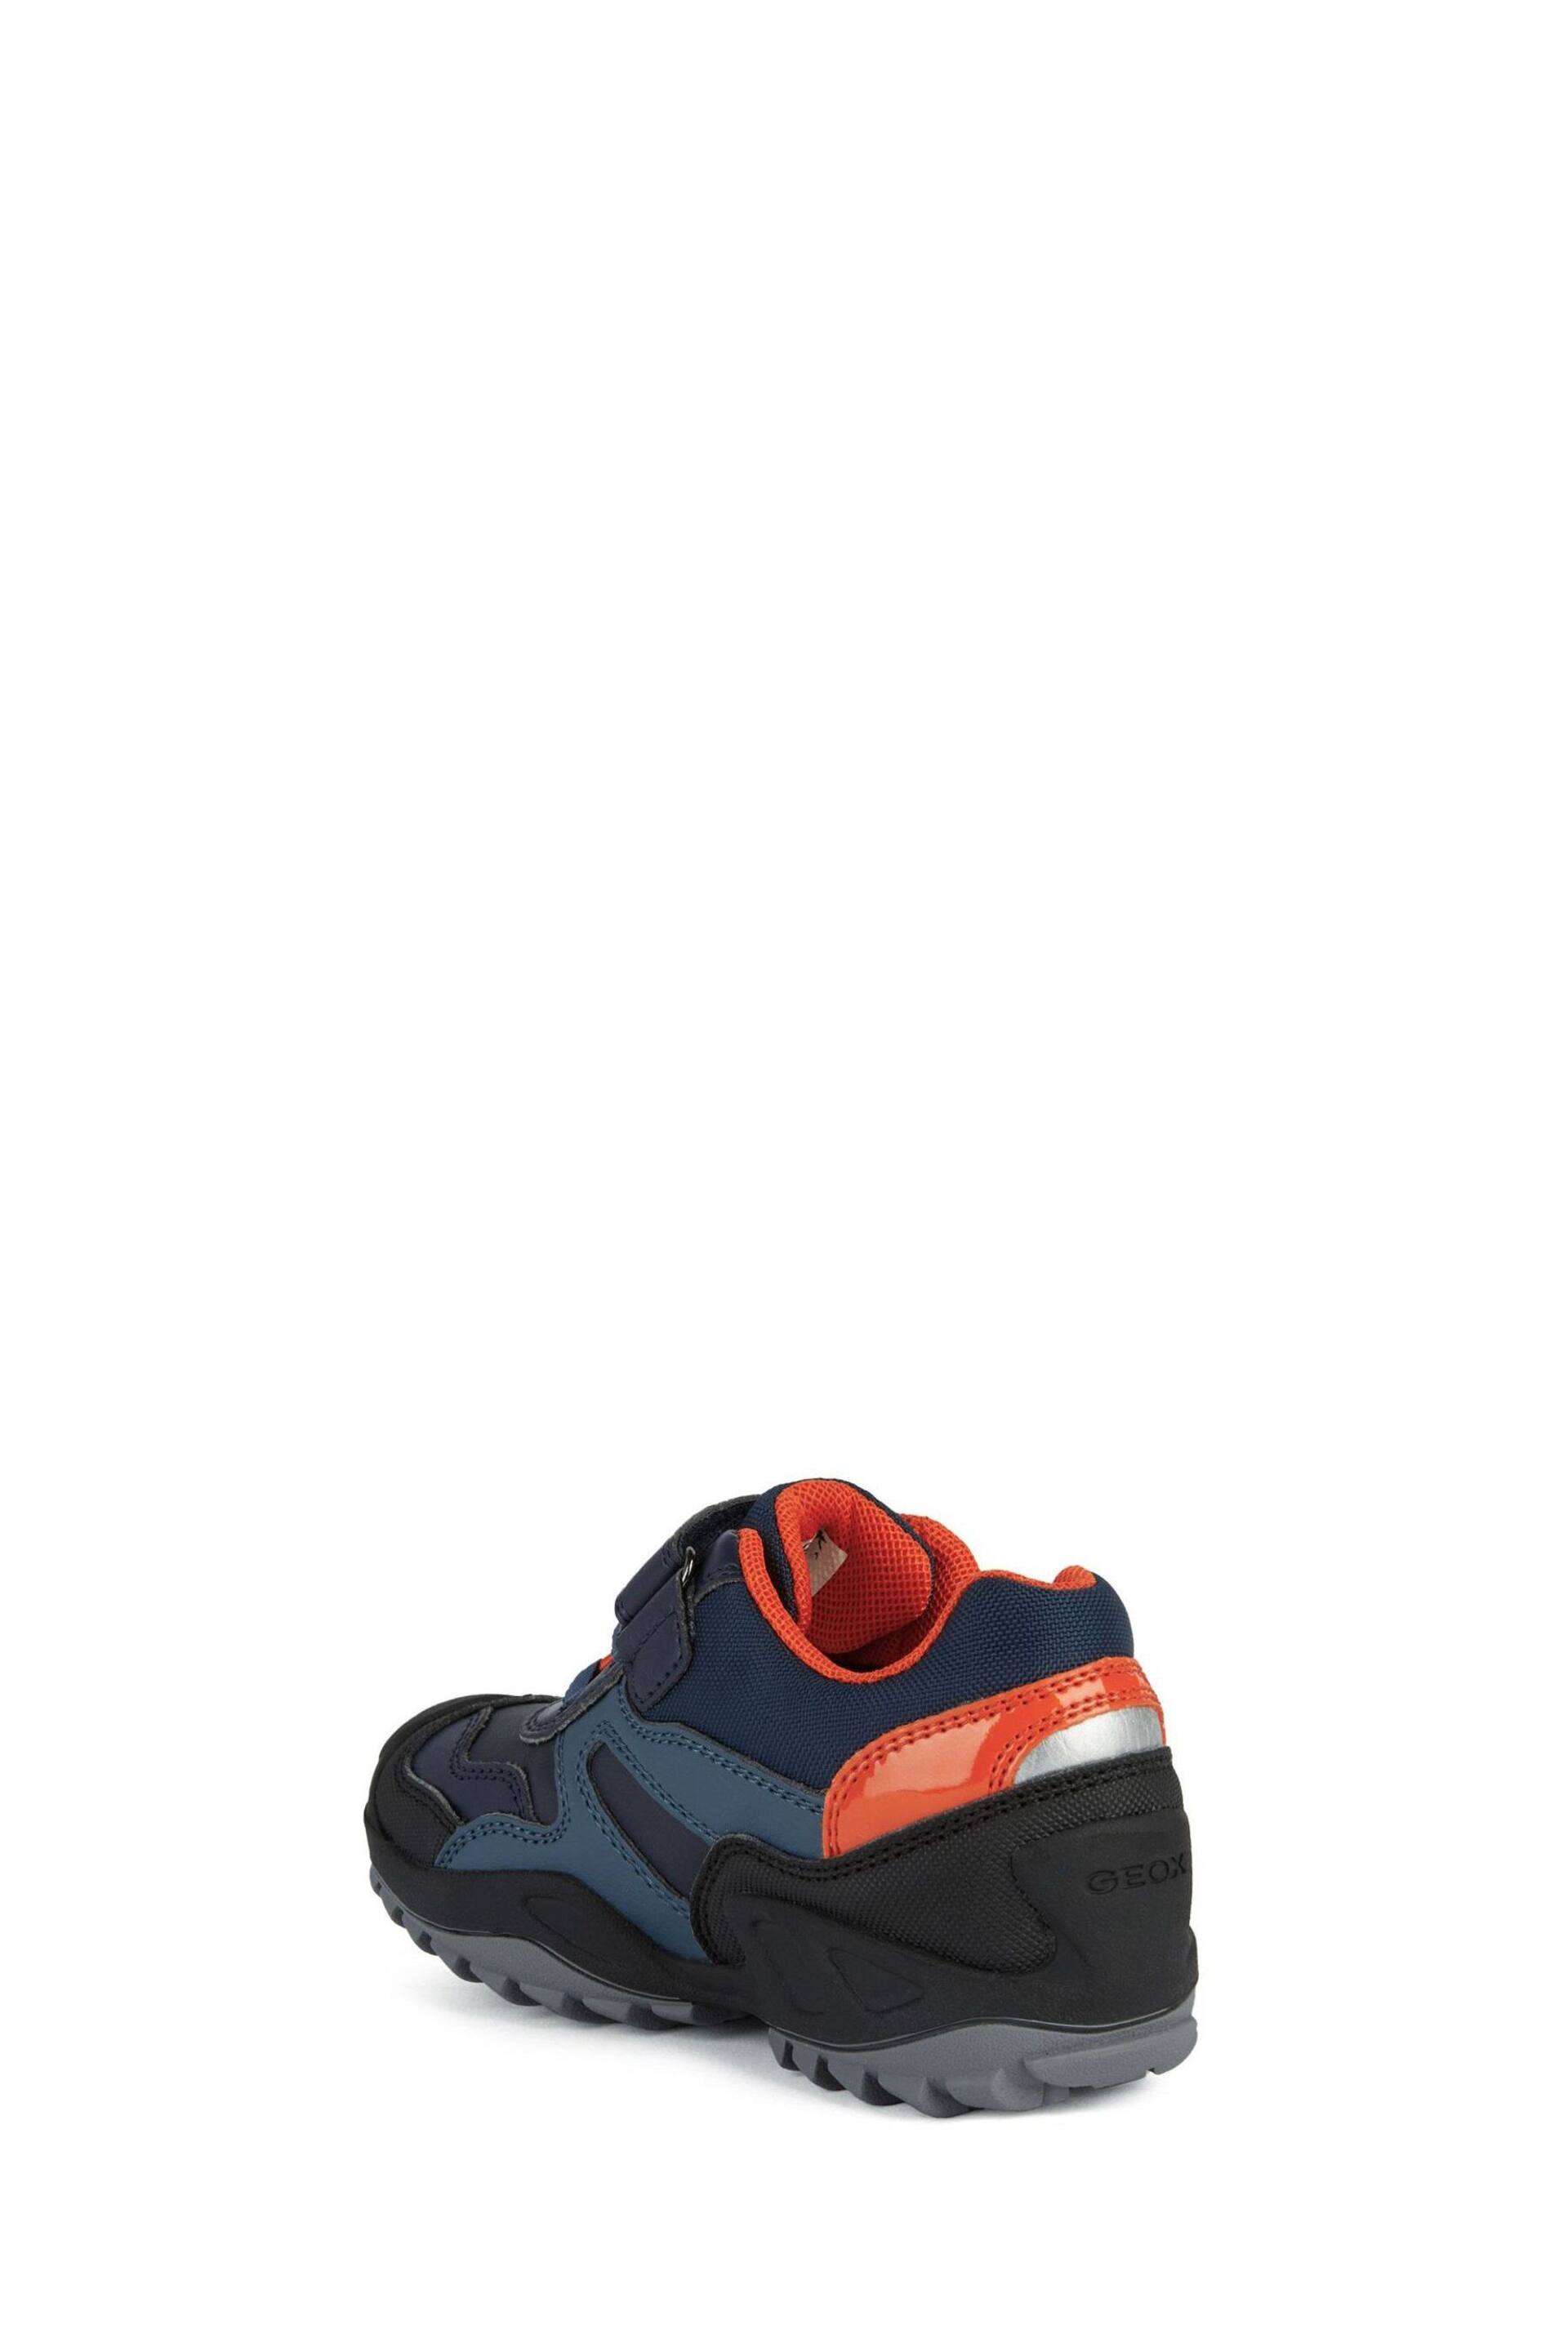 Geox Junior Boys Blue New Savage Shoes - Image 3 of 6